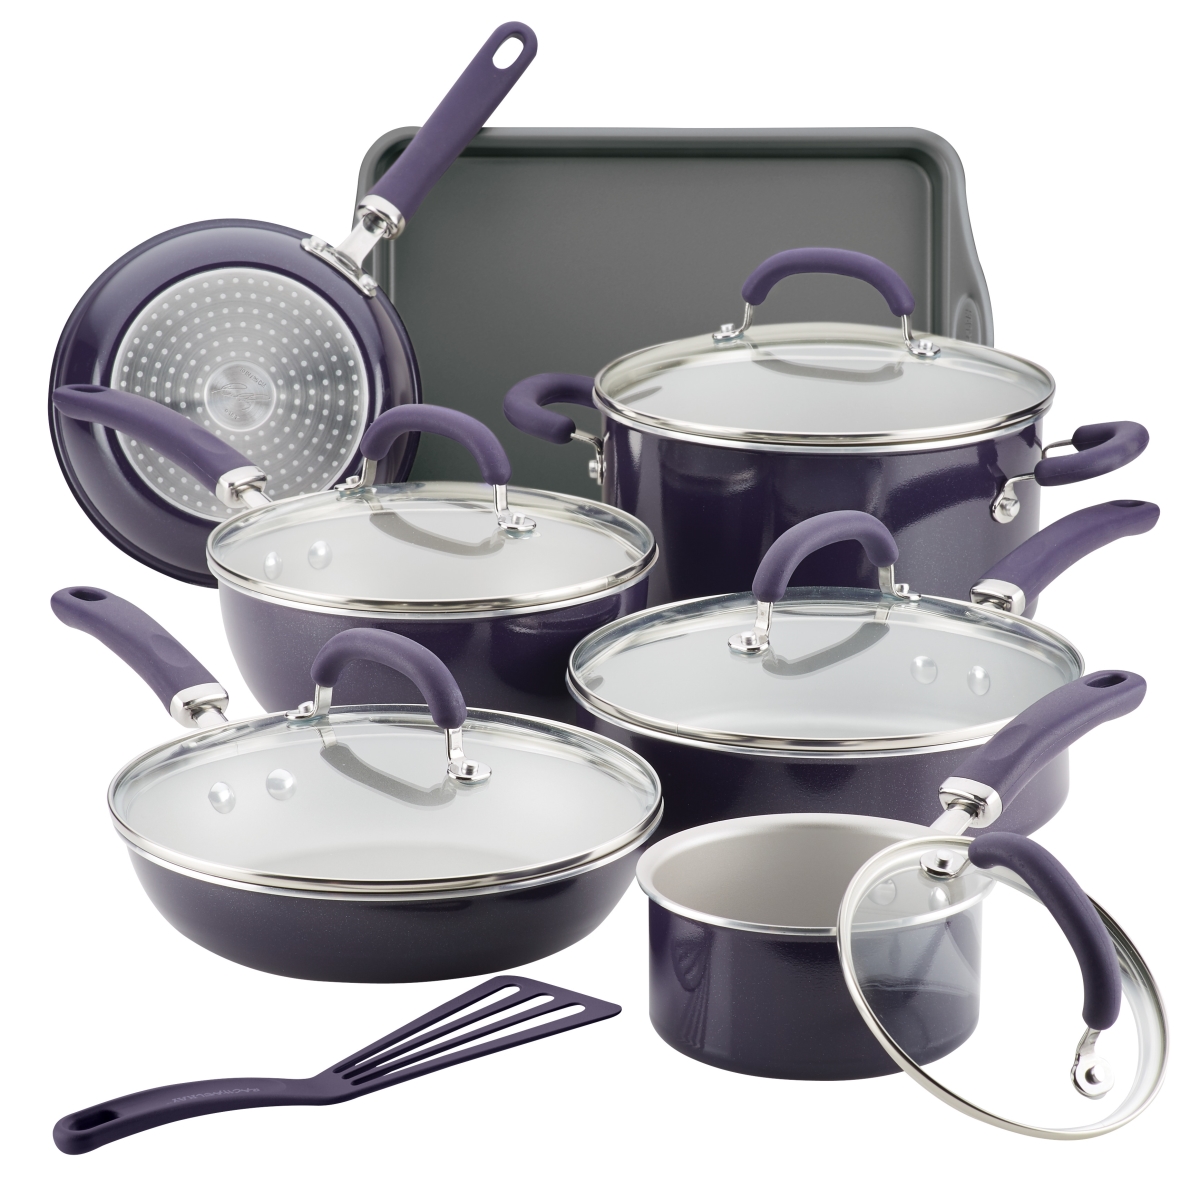 Picture of Rachael Ray 12154 Create Delicious Aluminum Nonstick Cookware Set, 13 Piece - Purple Shimmer